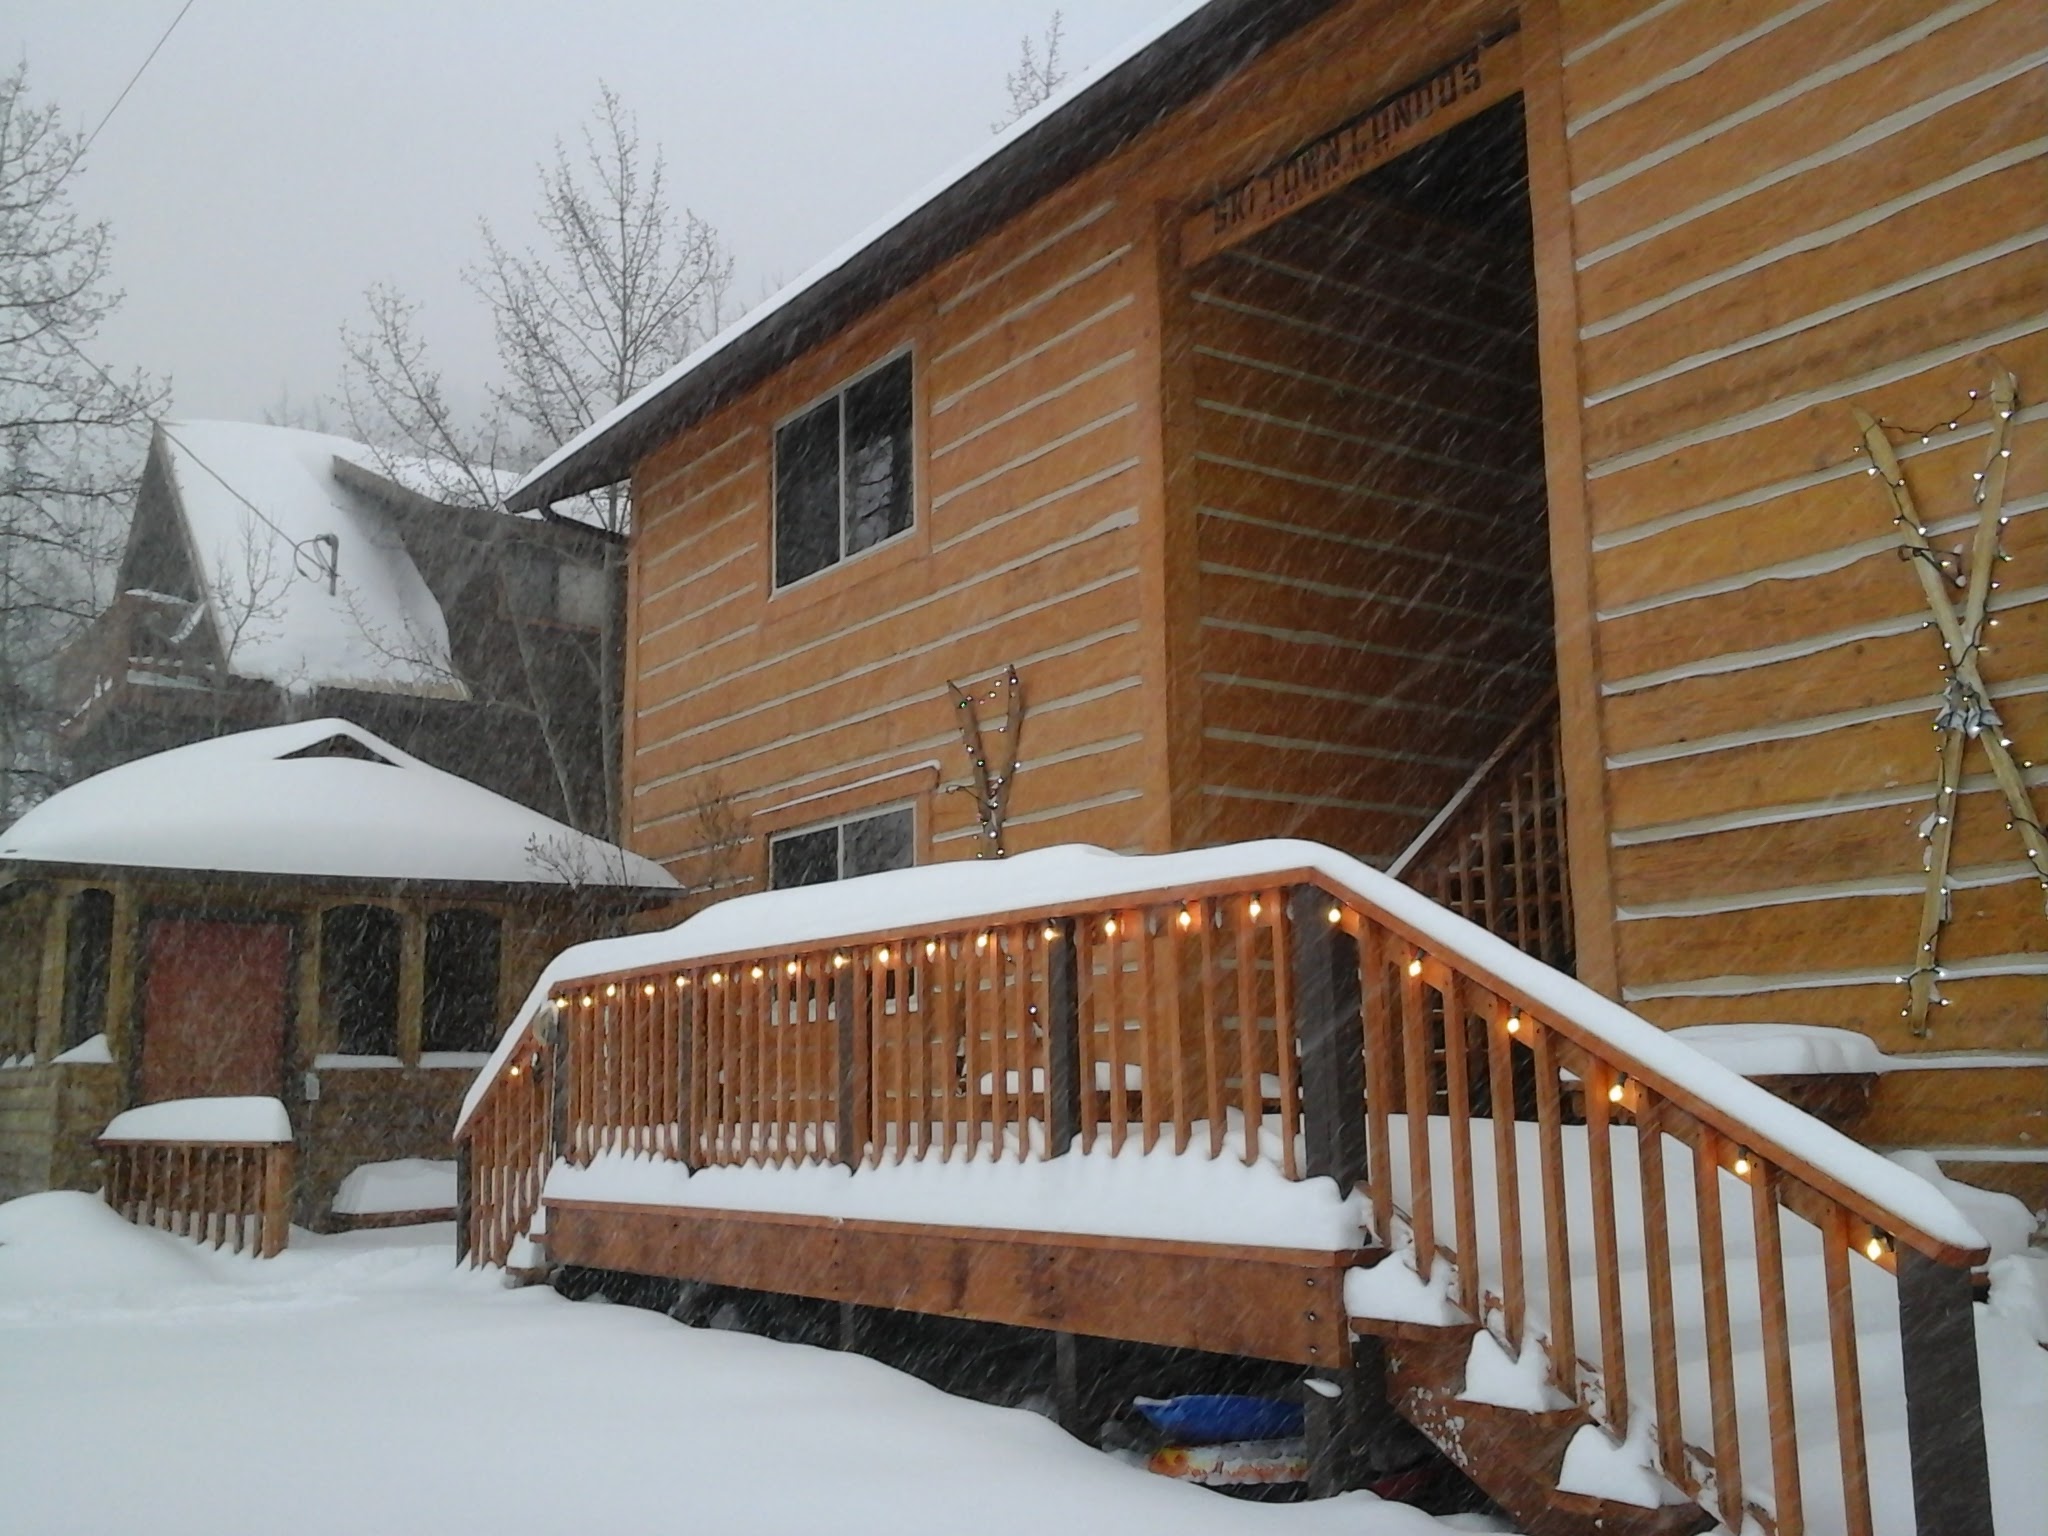 Exterior photo of condos with snow falling, six inches of snow and lights shining along the deck railing.